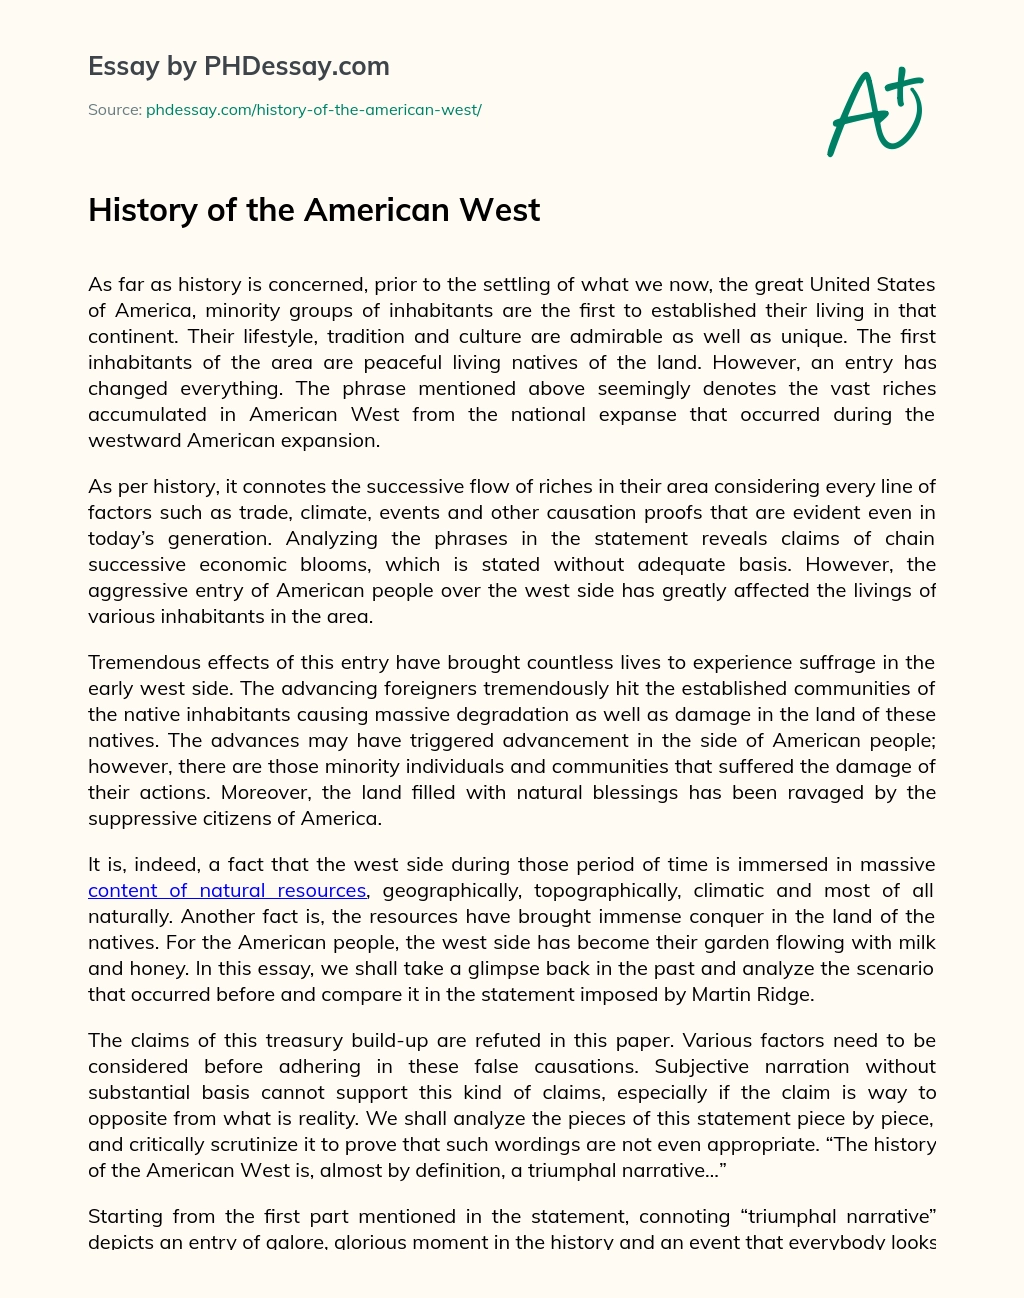 History of the American West essay